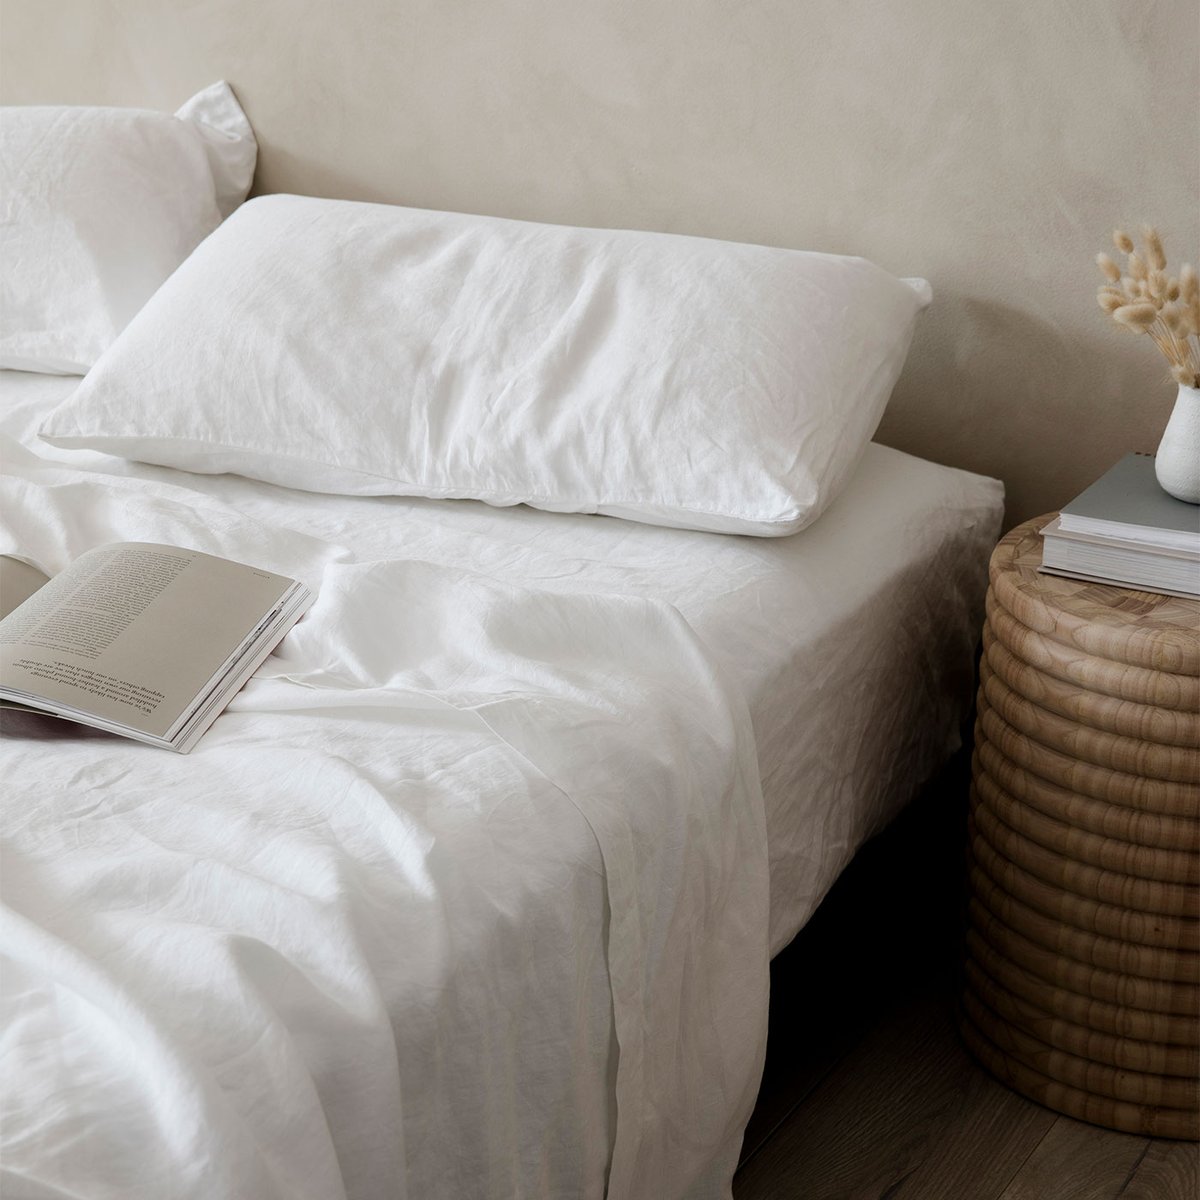 Product_Page_Main_Image_1400x1400_Fitted_Sheet_White_2_1200x